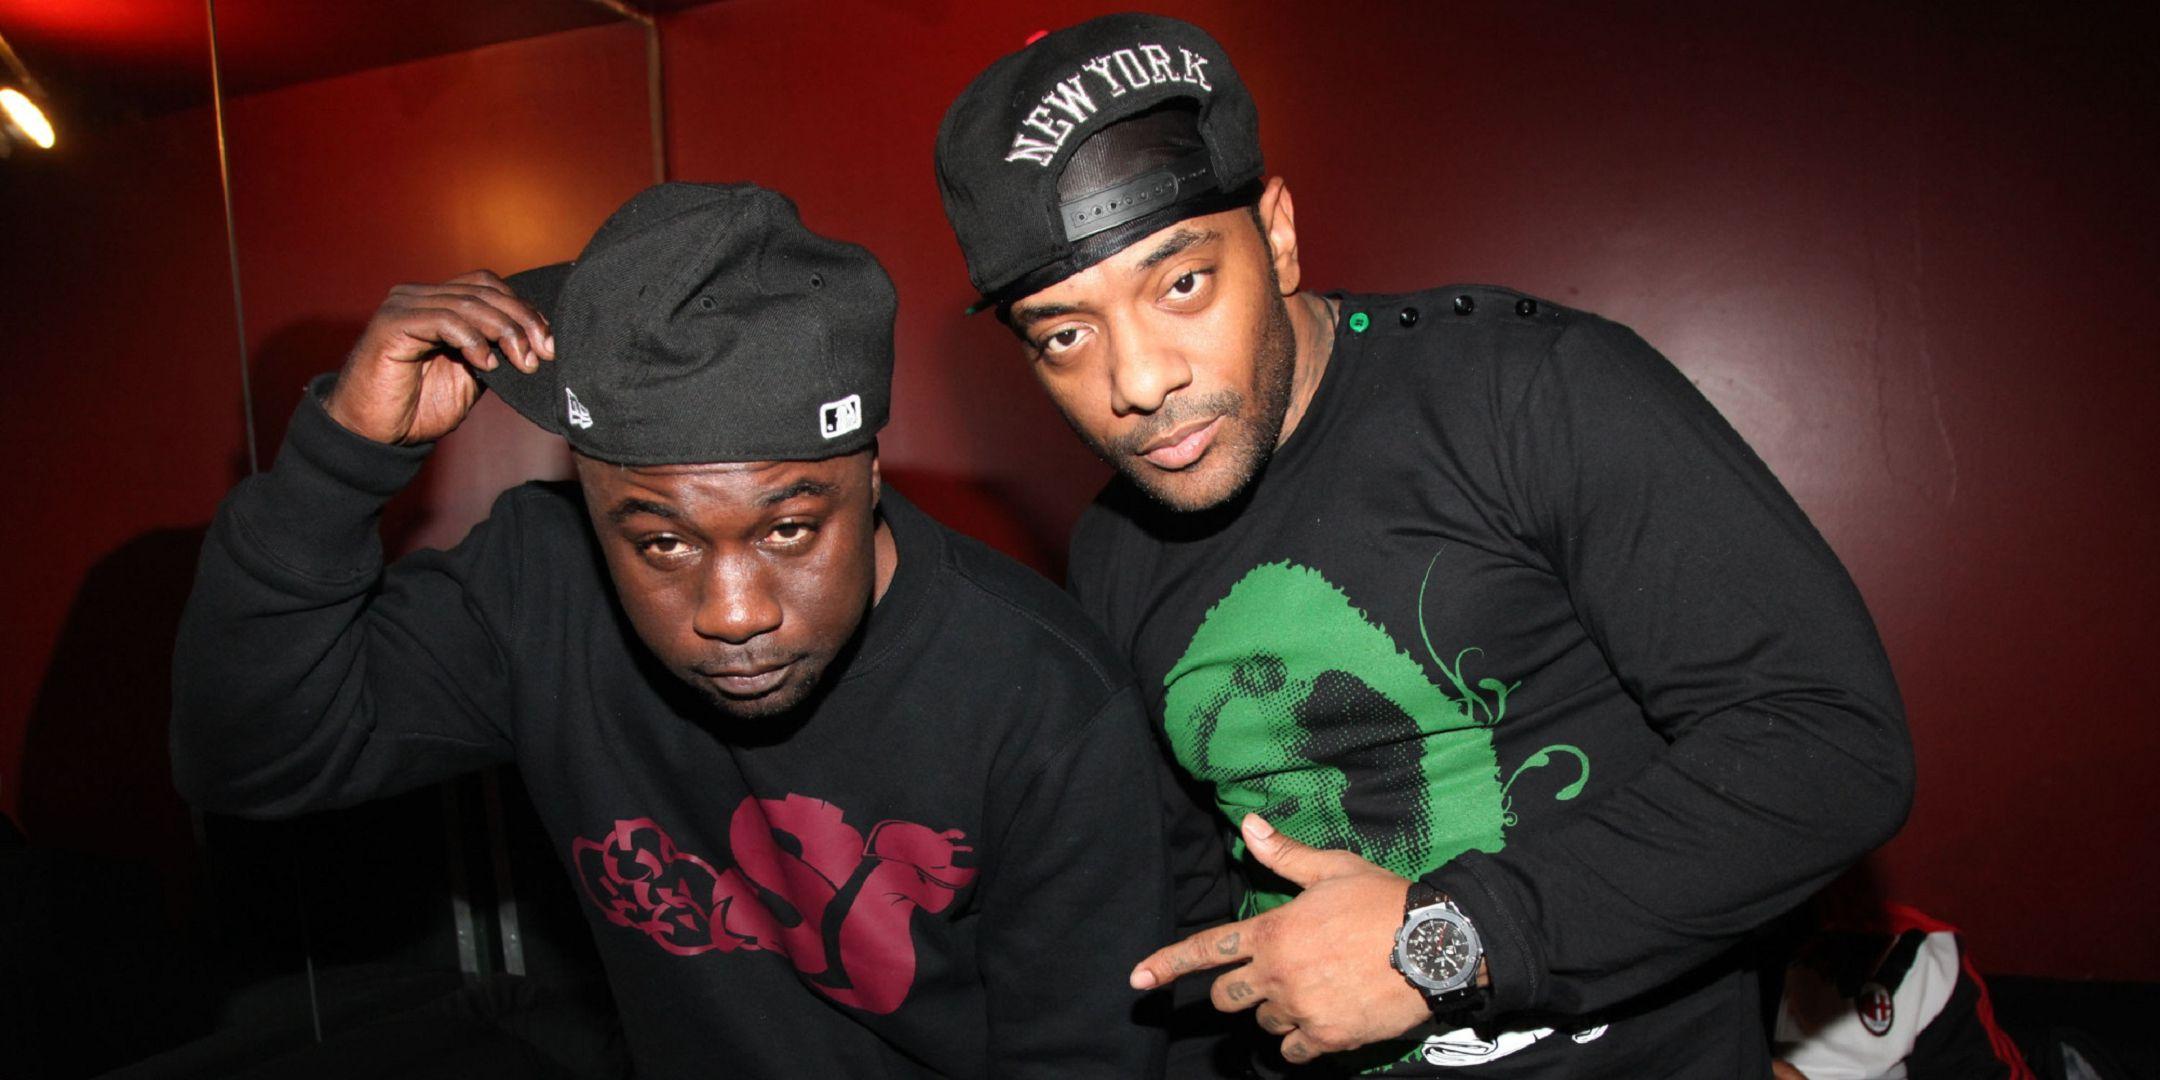 Mobb Deep Wallpaper Image Photo Picture Background